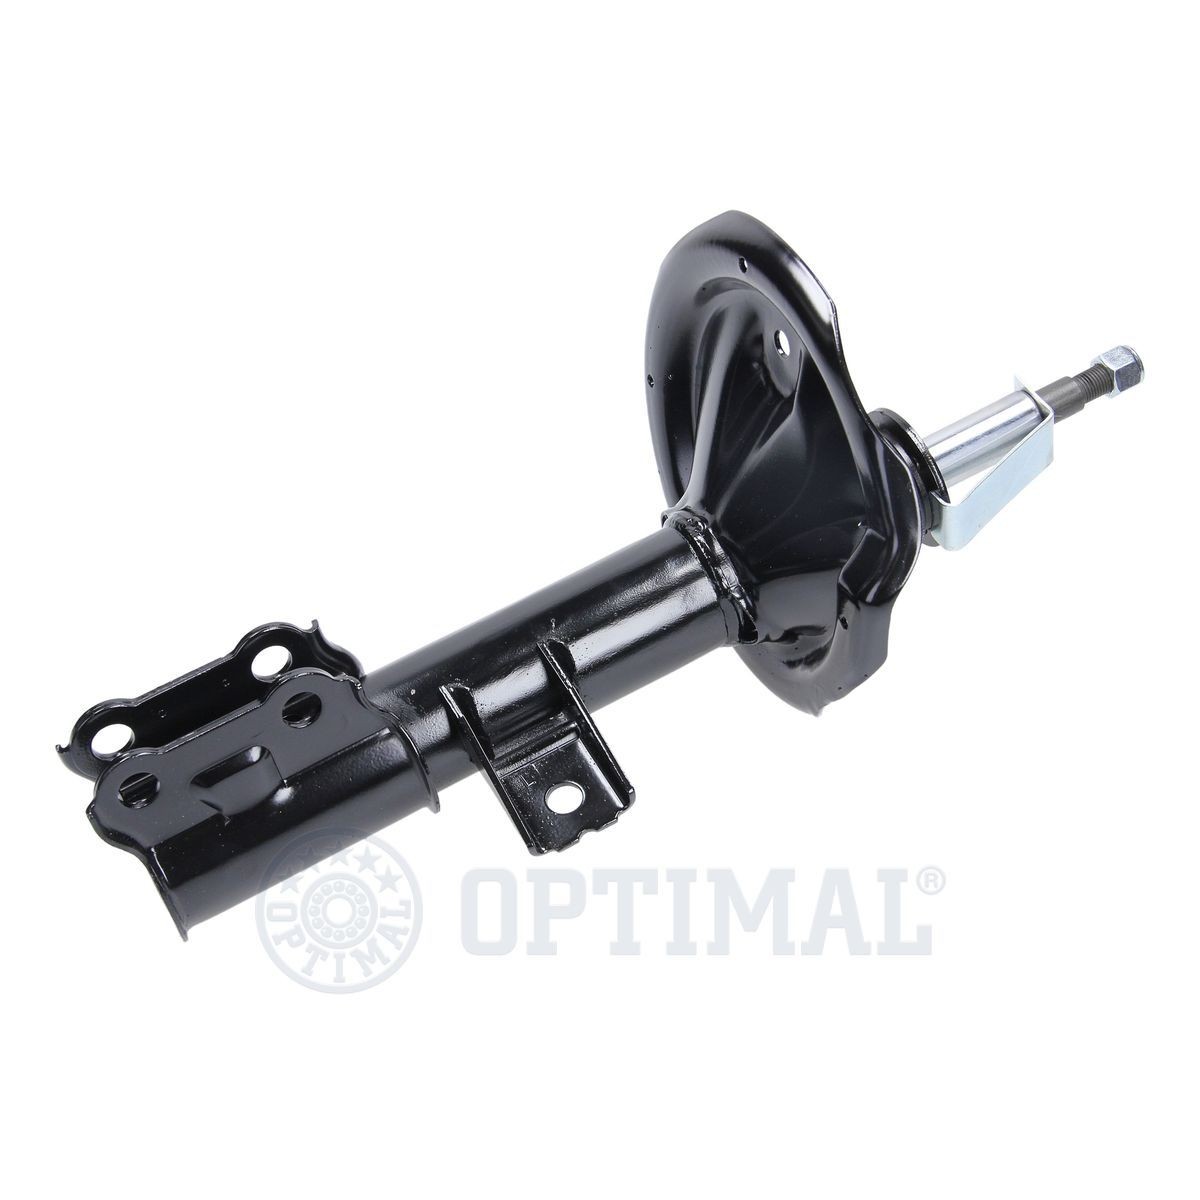 OPTIMAL Suspension shocks A-3633GL for KIA CEE'D, PROCEED